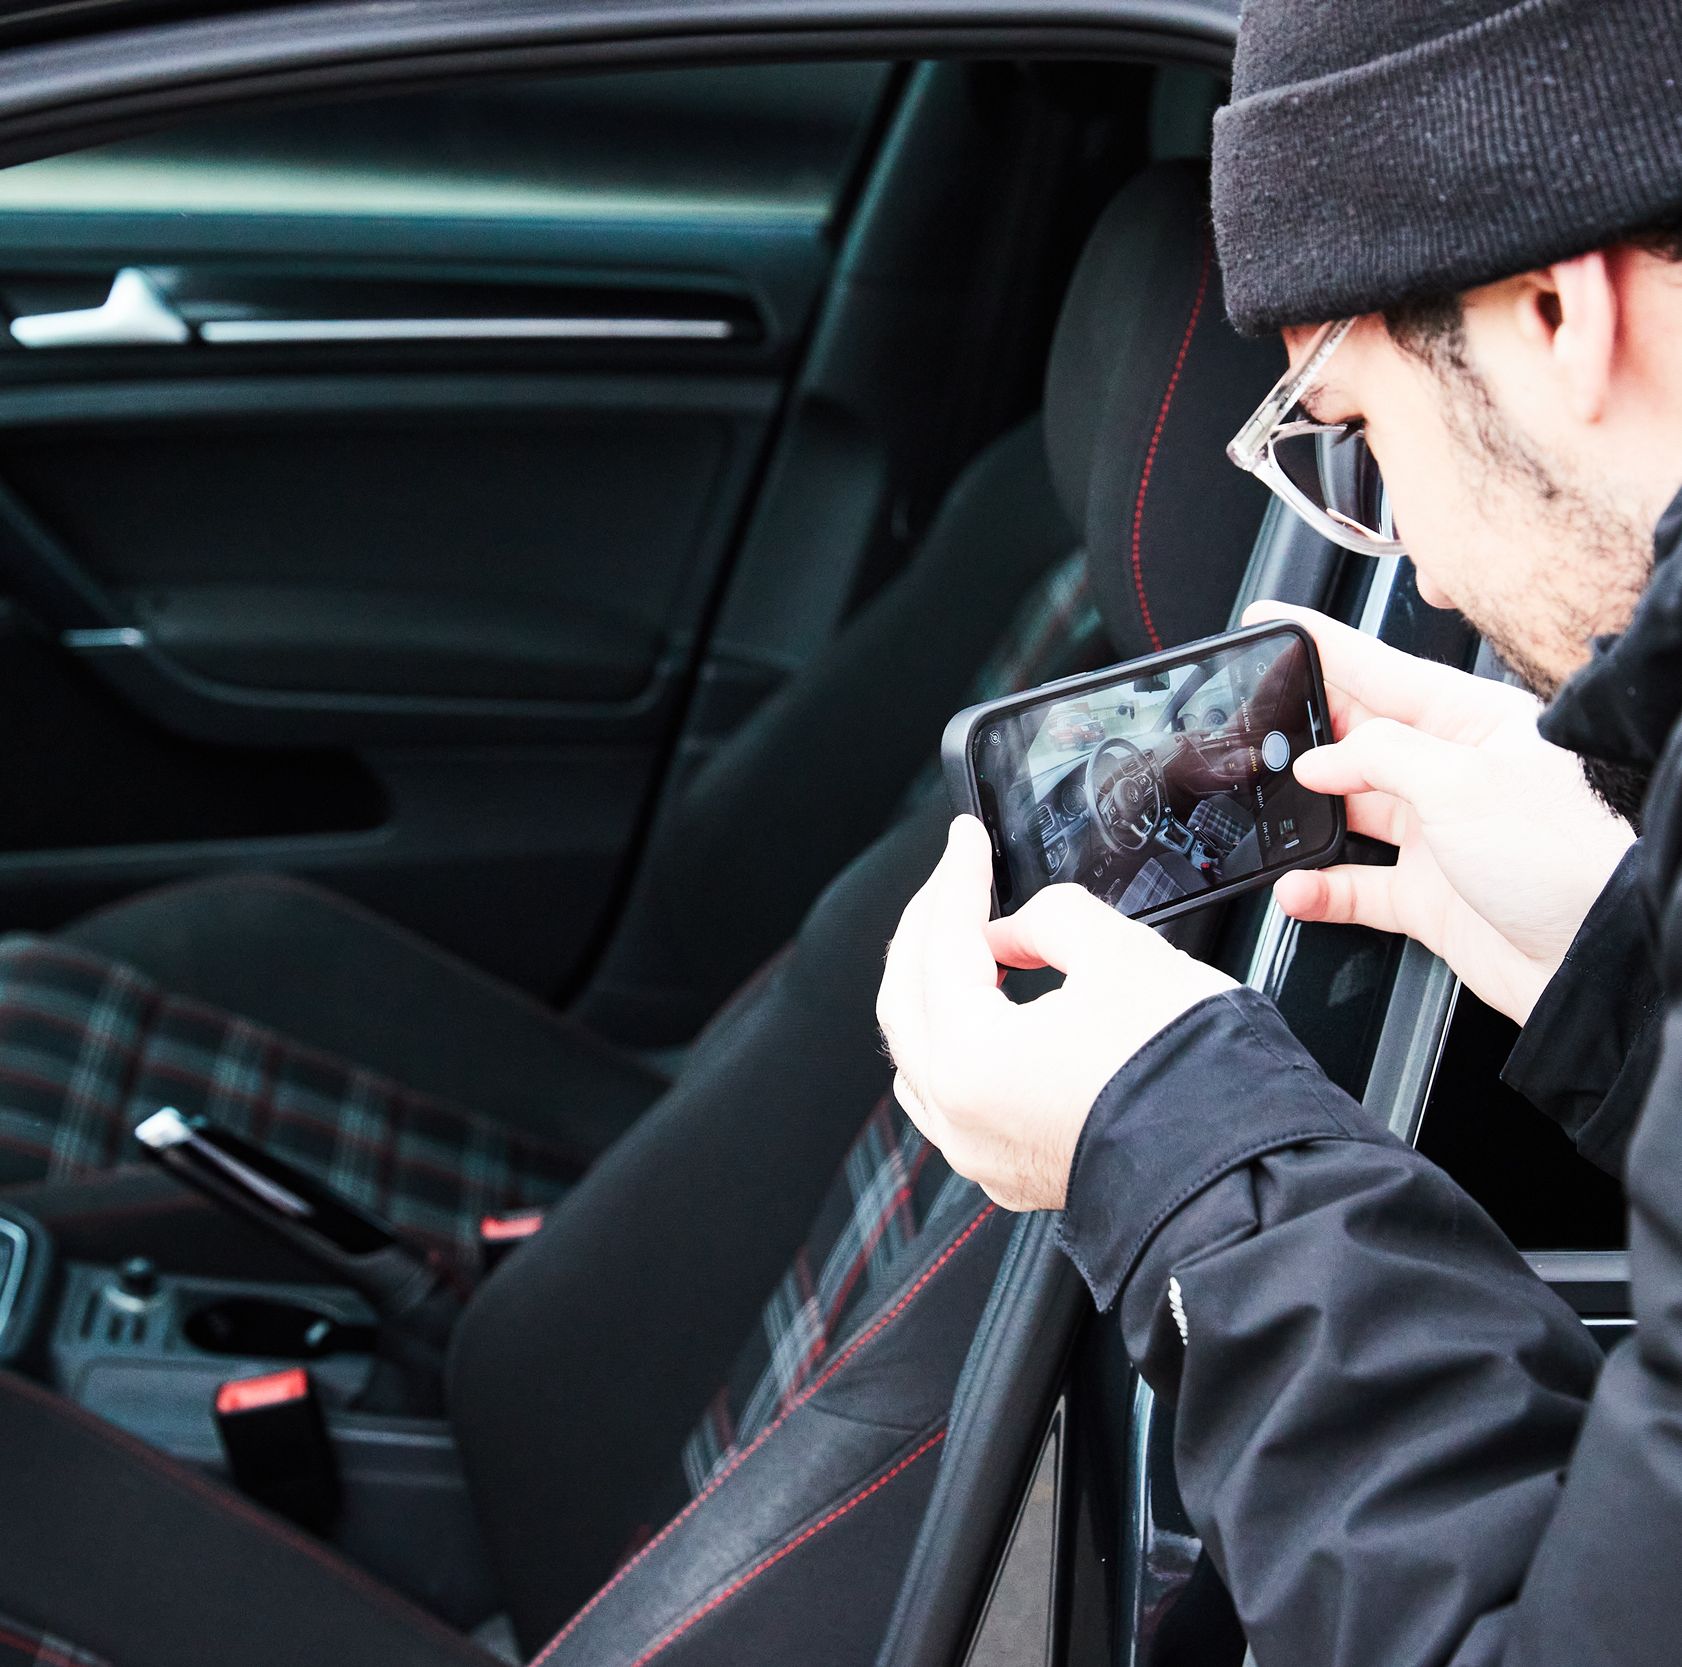 Great Photos Are the Key to Selling Your Car. Here's How to Take Pro-Level Pics